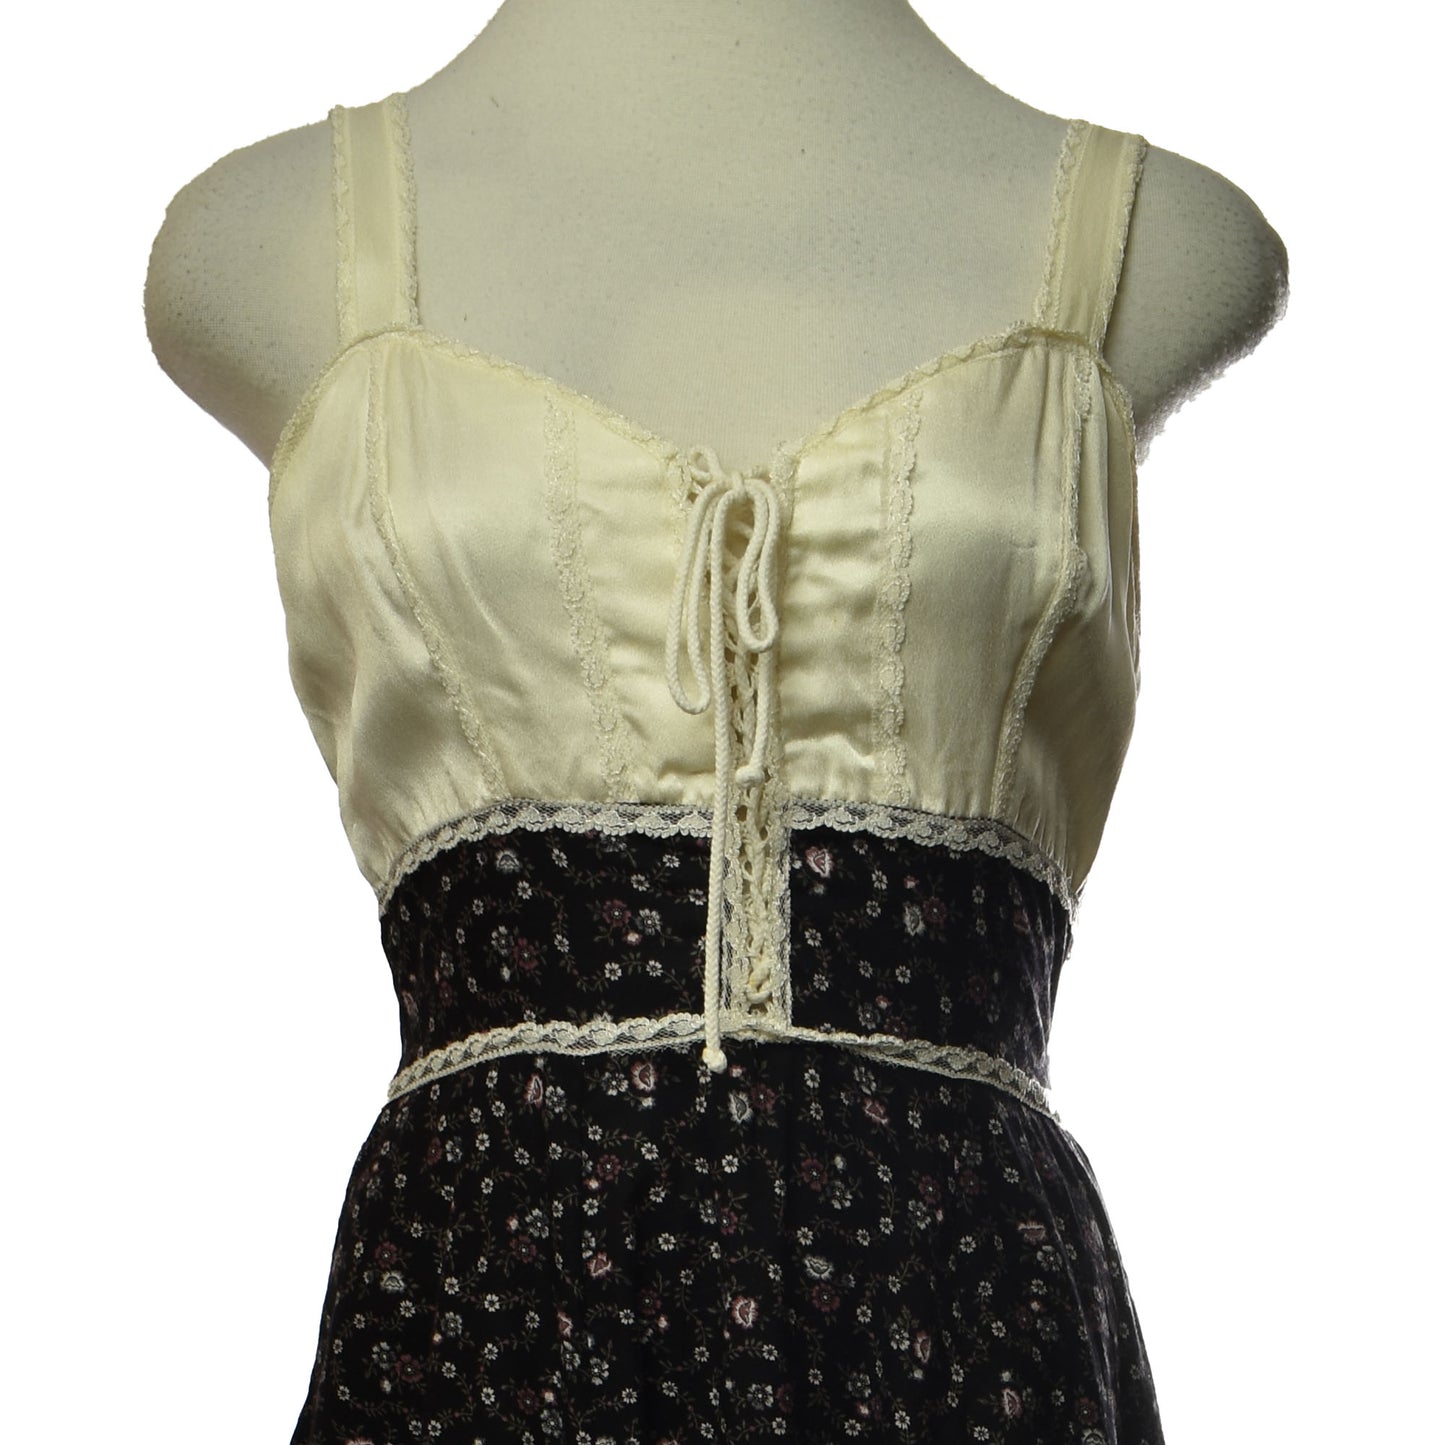 Vintage 1970's  Jessica's Gunnie's San Francisco Sleeveless Prairie Style Dress with Satin Bodice, Front Corset Style Tie and a Floral Print Floor Length Skirt with Lace Detailing